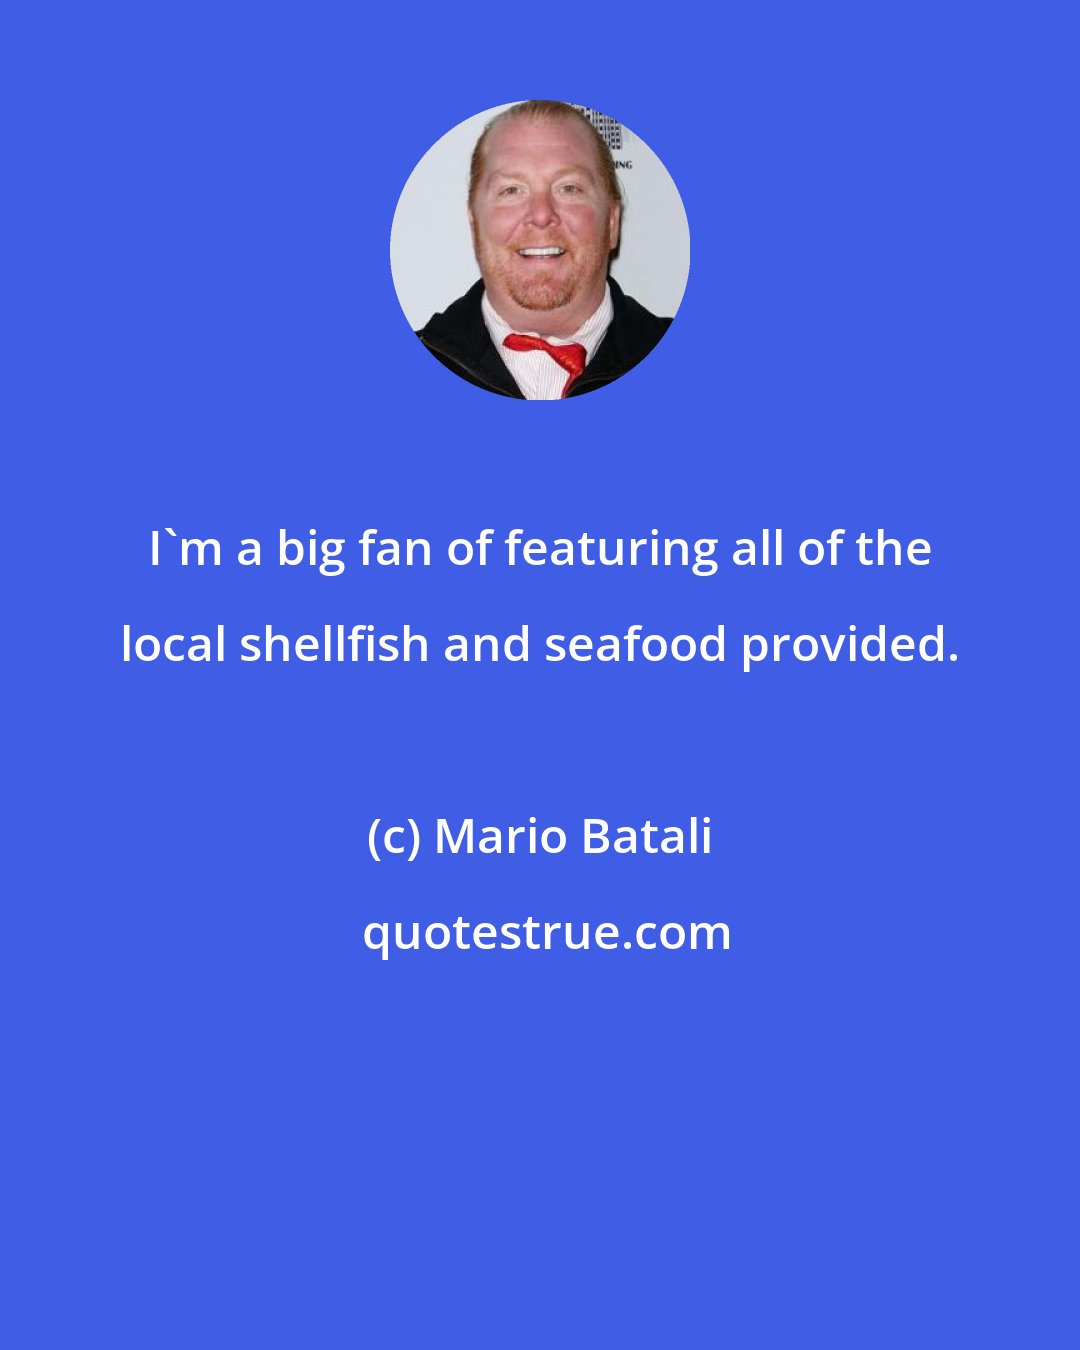 Mario Batali: I'm a big fan of featuring all of the local shellfish and seafood provided.